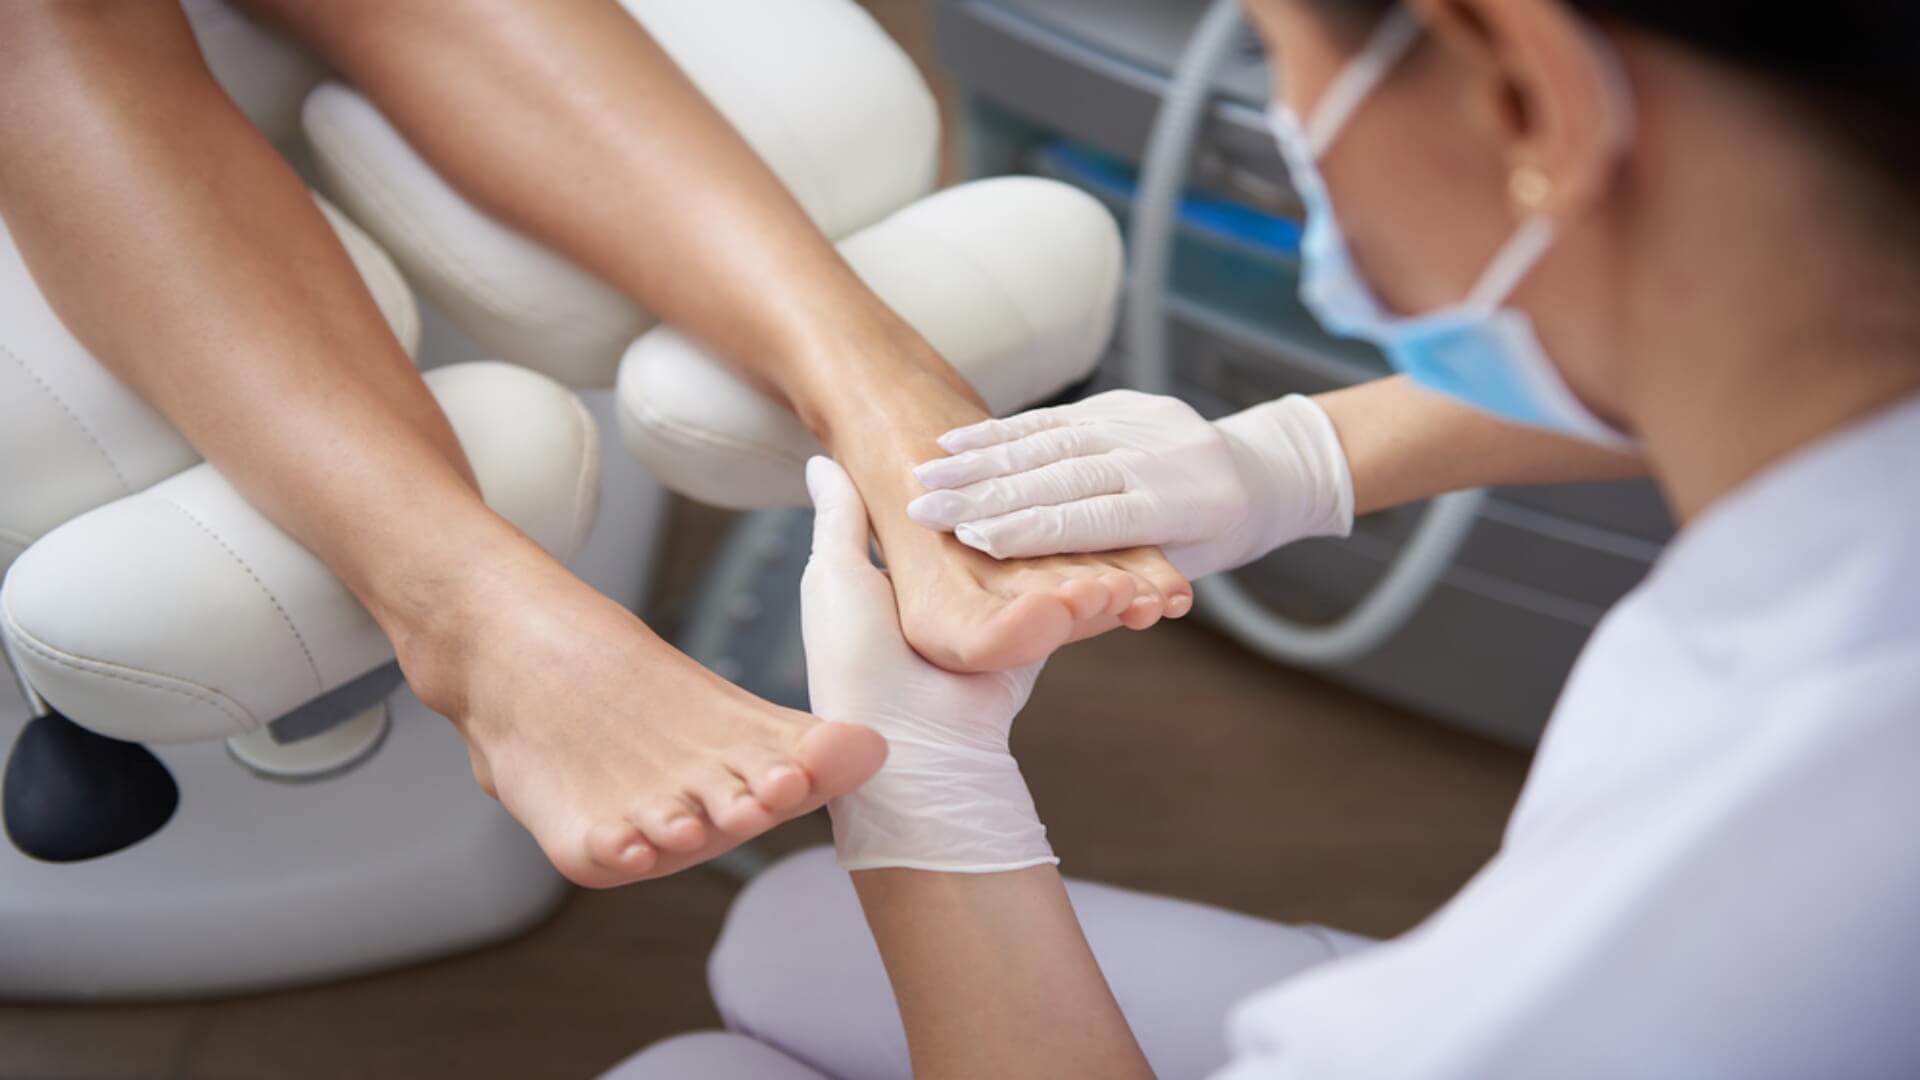 Feet Care 101: 6 Tips To Get On A Good Footing